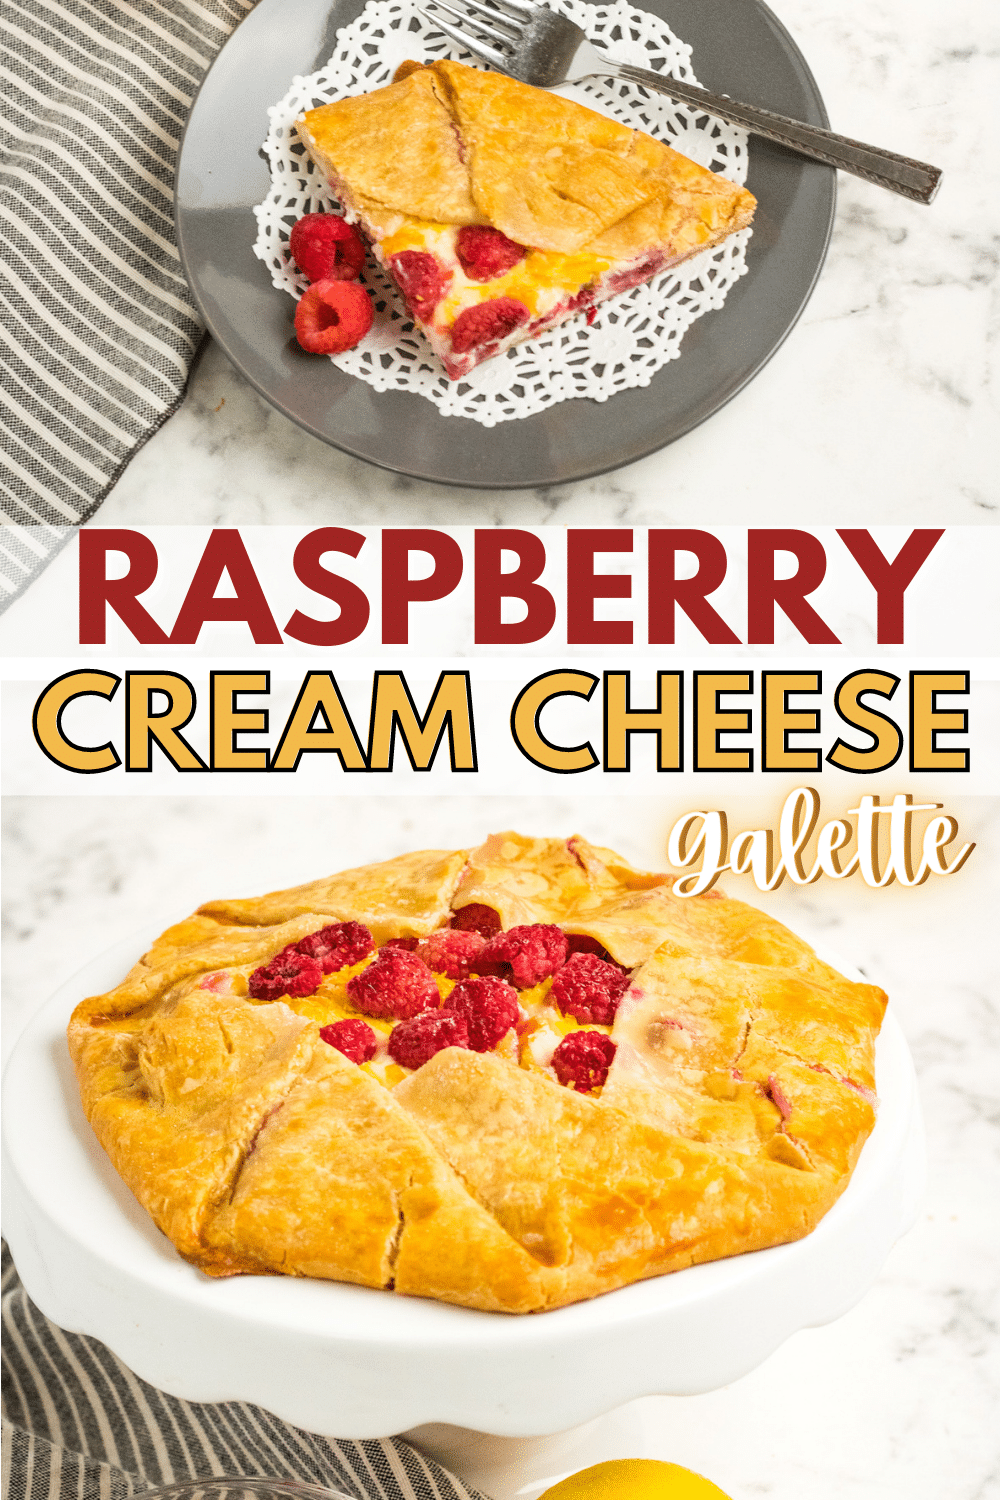 a collage of a slice of Raspberry Cream Cheese Galette on a plate and on a cake stand with title text in between reading Raspberry Cream Cheese Galette